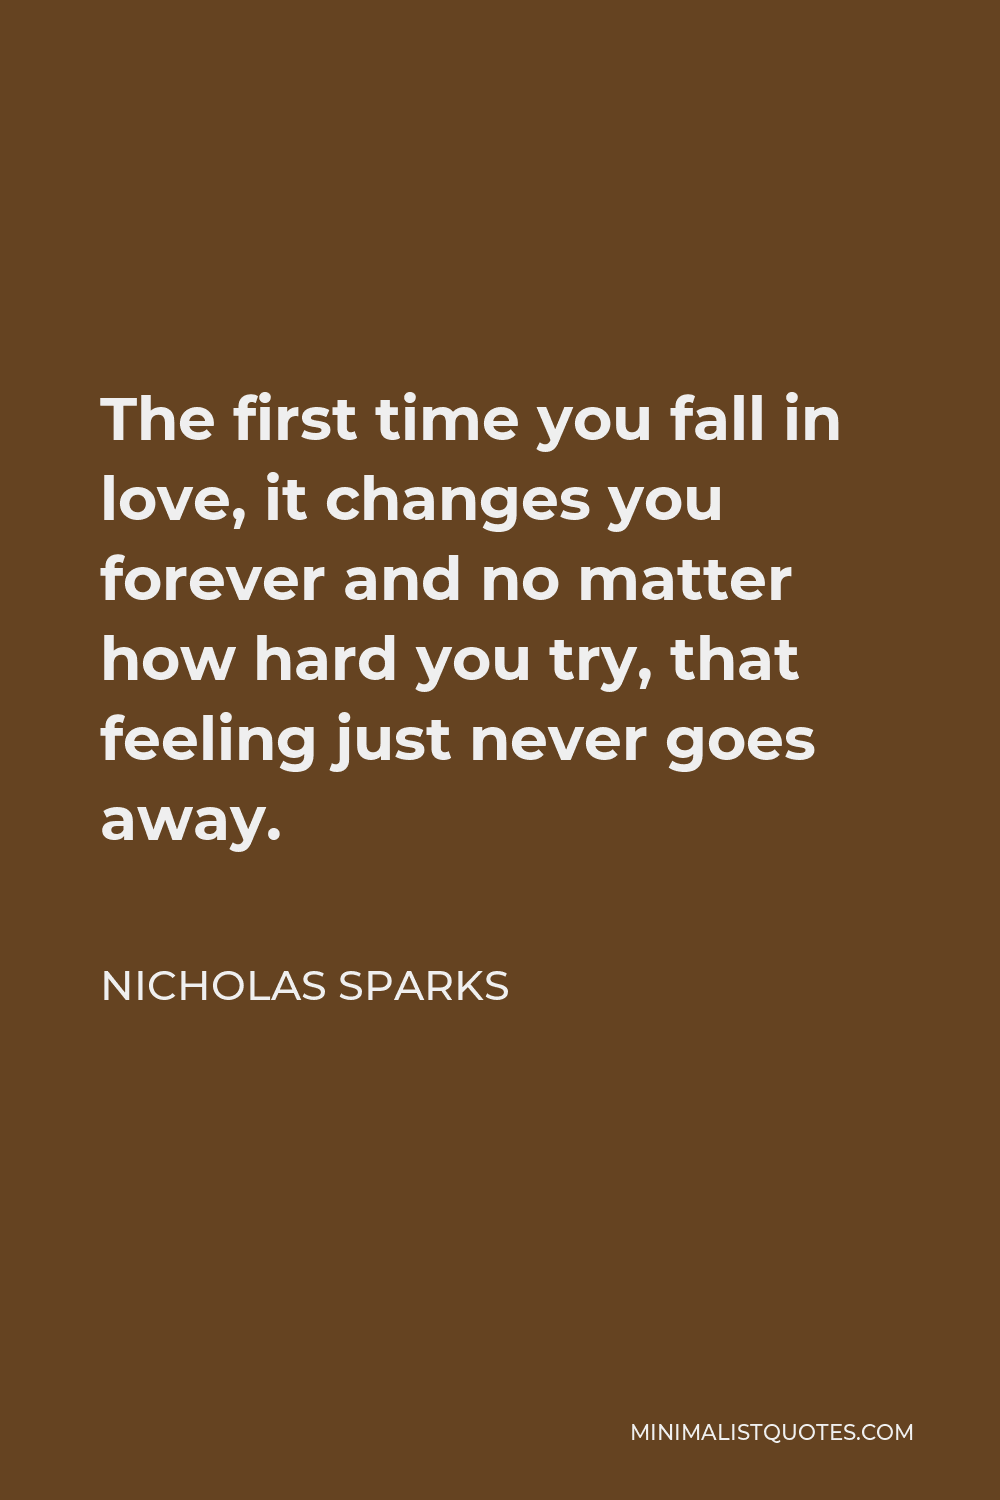 Nicholas Sparks Quote - The first time you fall in love, it changes you forever and no matter how hard you try, that feeling just never goes away.